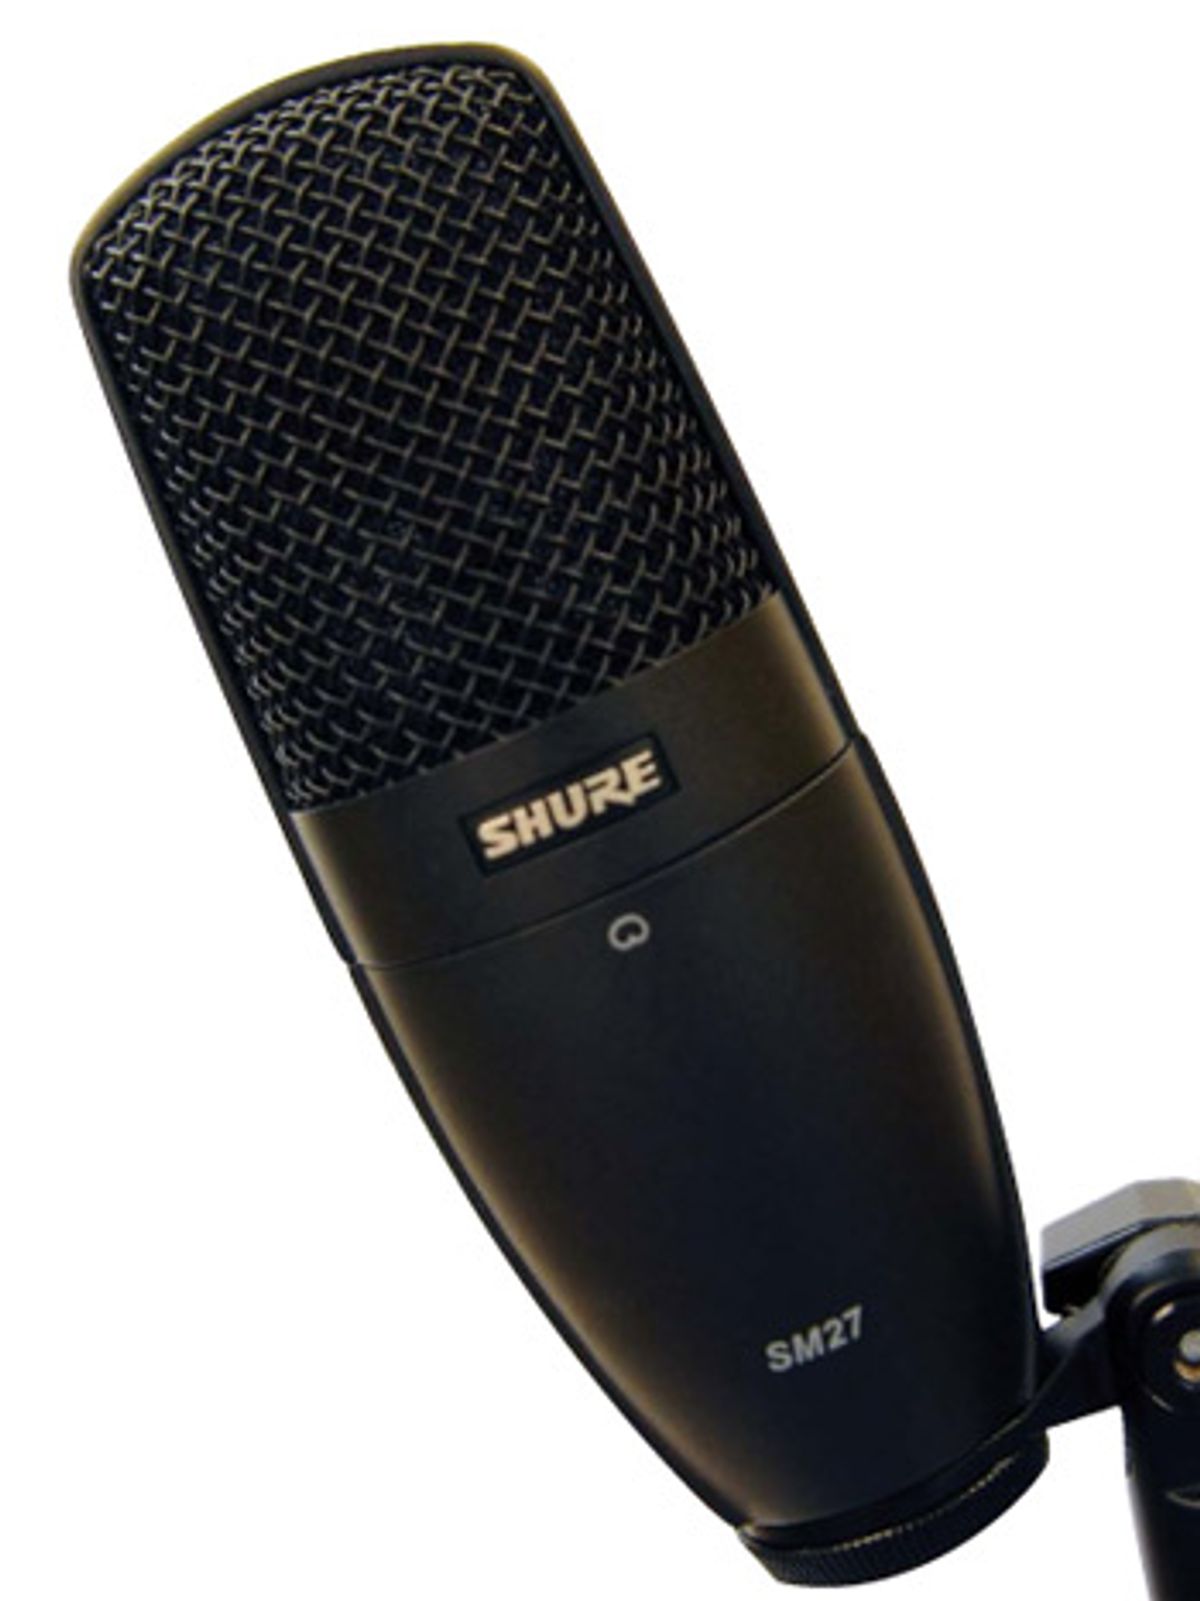 Shure SM27 Microphone Review